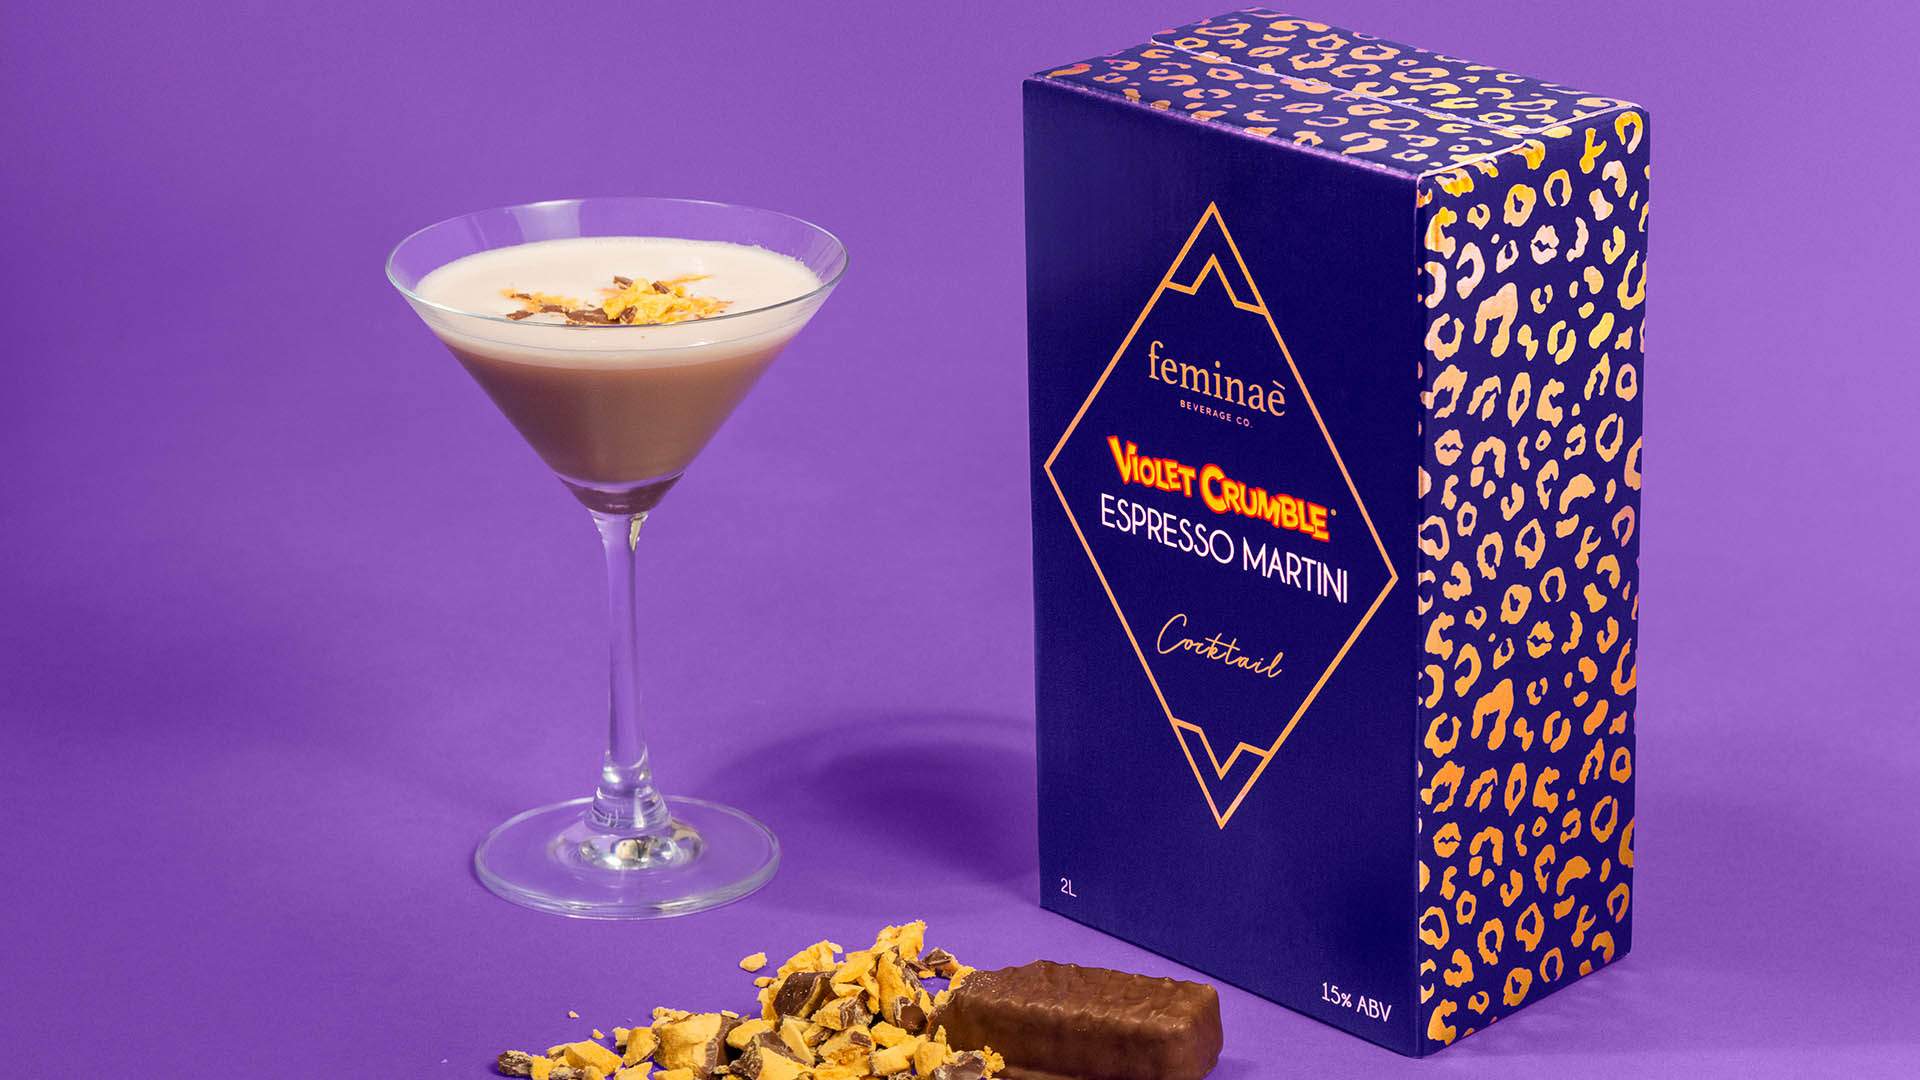 You Can Now Buy Violet Crumble Espresso Martinis in Two-Litre Ready-to-Drink Casks